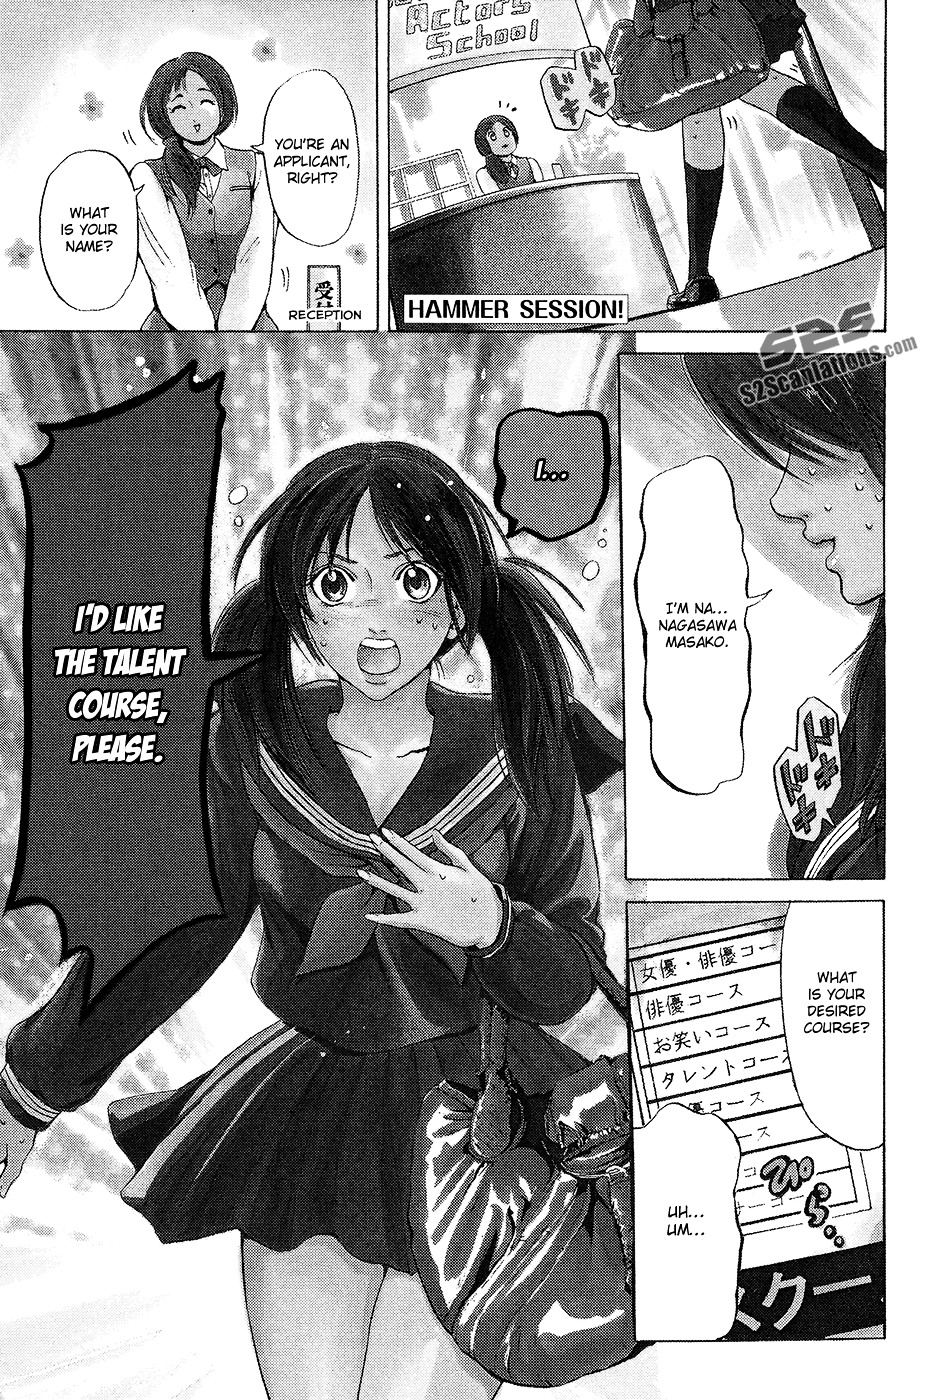 Hammer Session! Vol.4 Chapter 28 : Session 28. The Story Of Mizuki Ryoko S Great Spy Strategy! - Picture 2